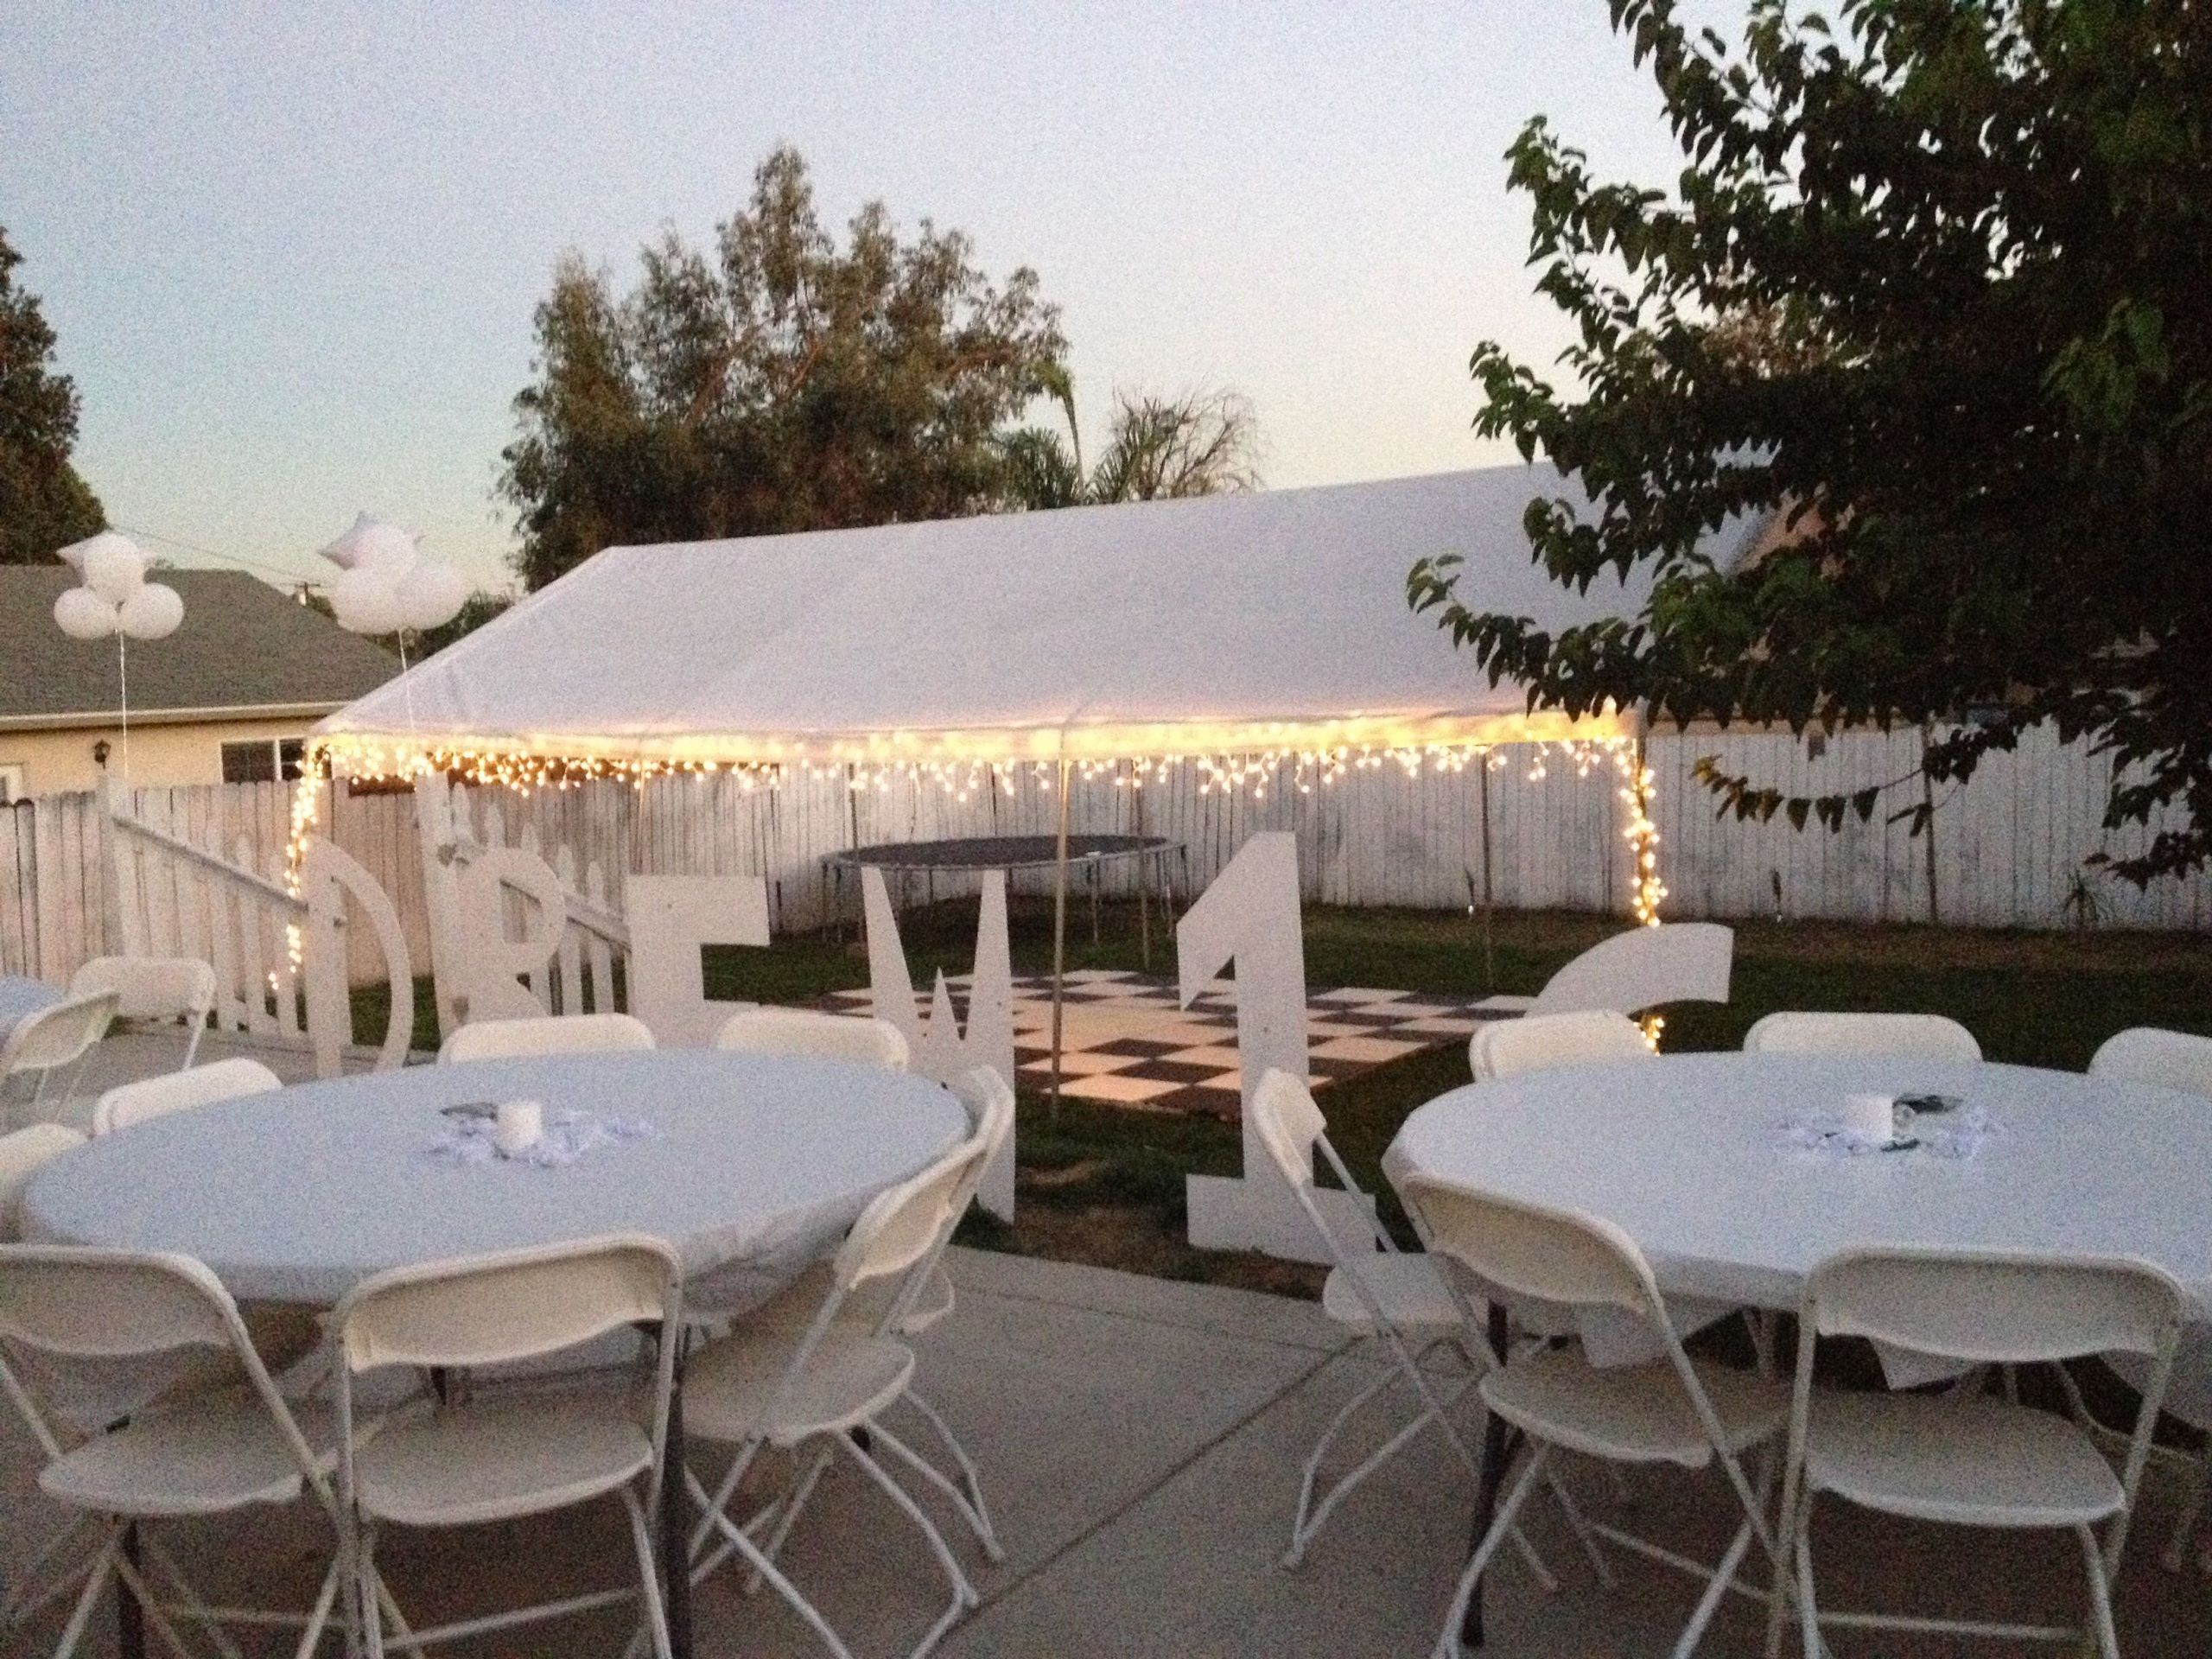 Sweet 16 Backyard Party Ideas
 All white party backyard set up in 2019